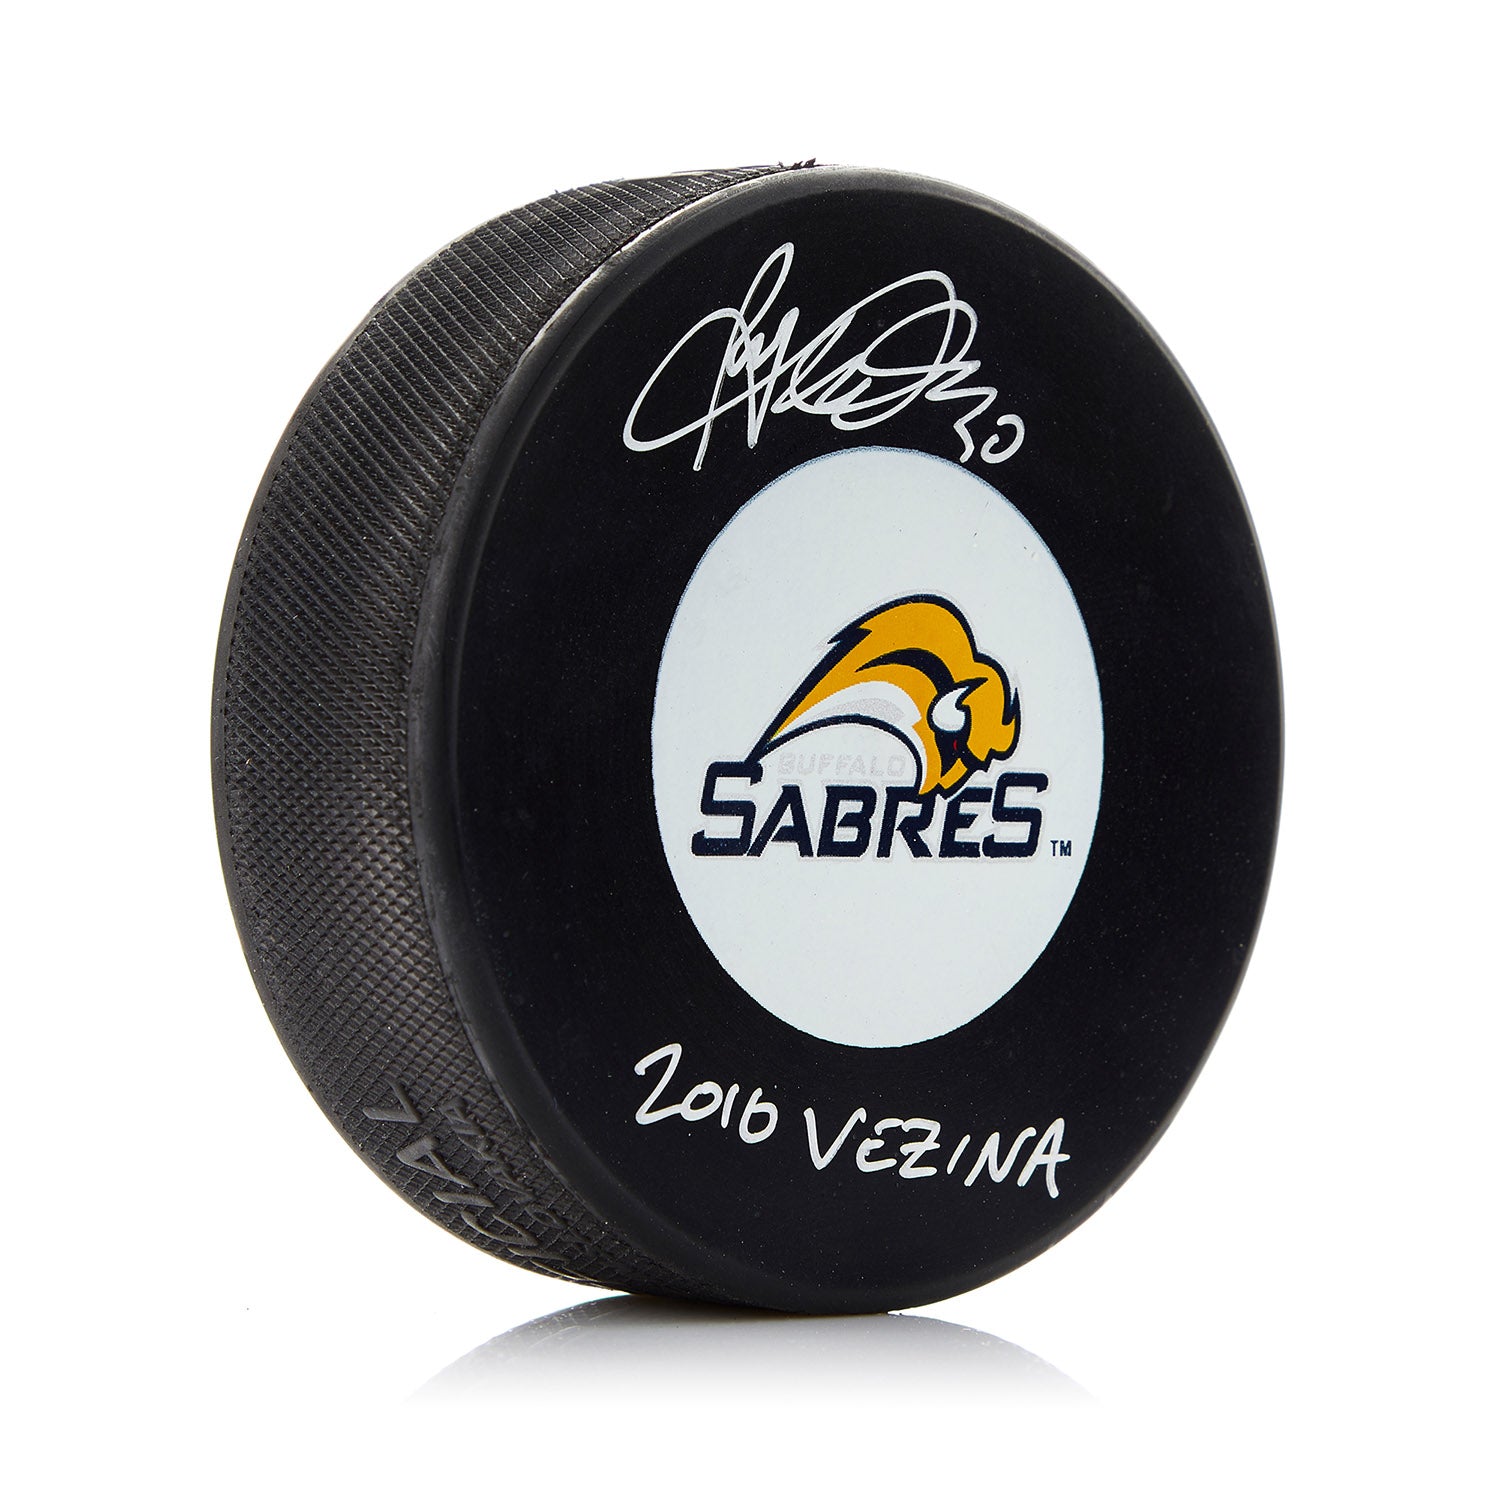 Ryan Miller Signed Buffalo Sabres Puck with 2010 Vezina Note